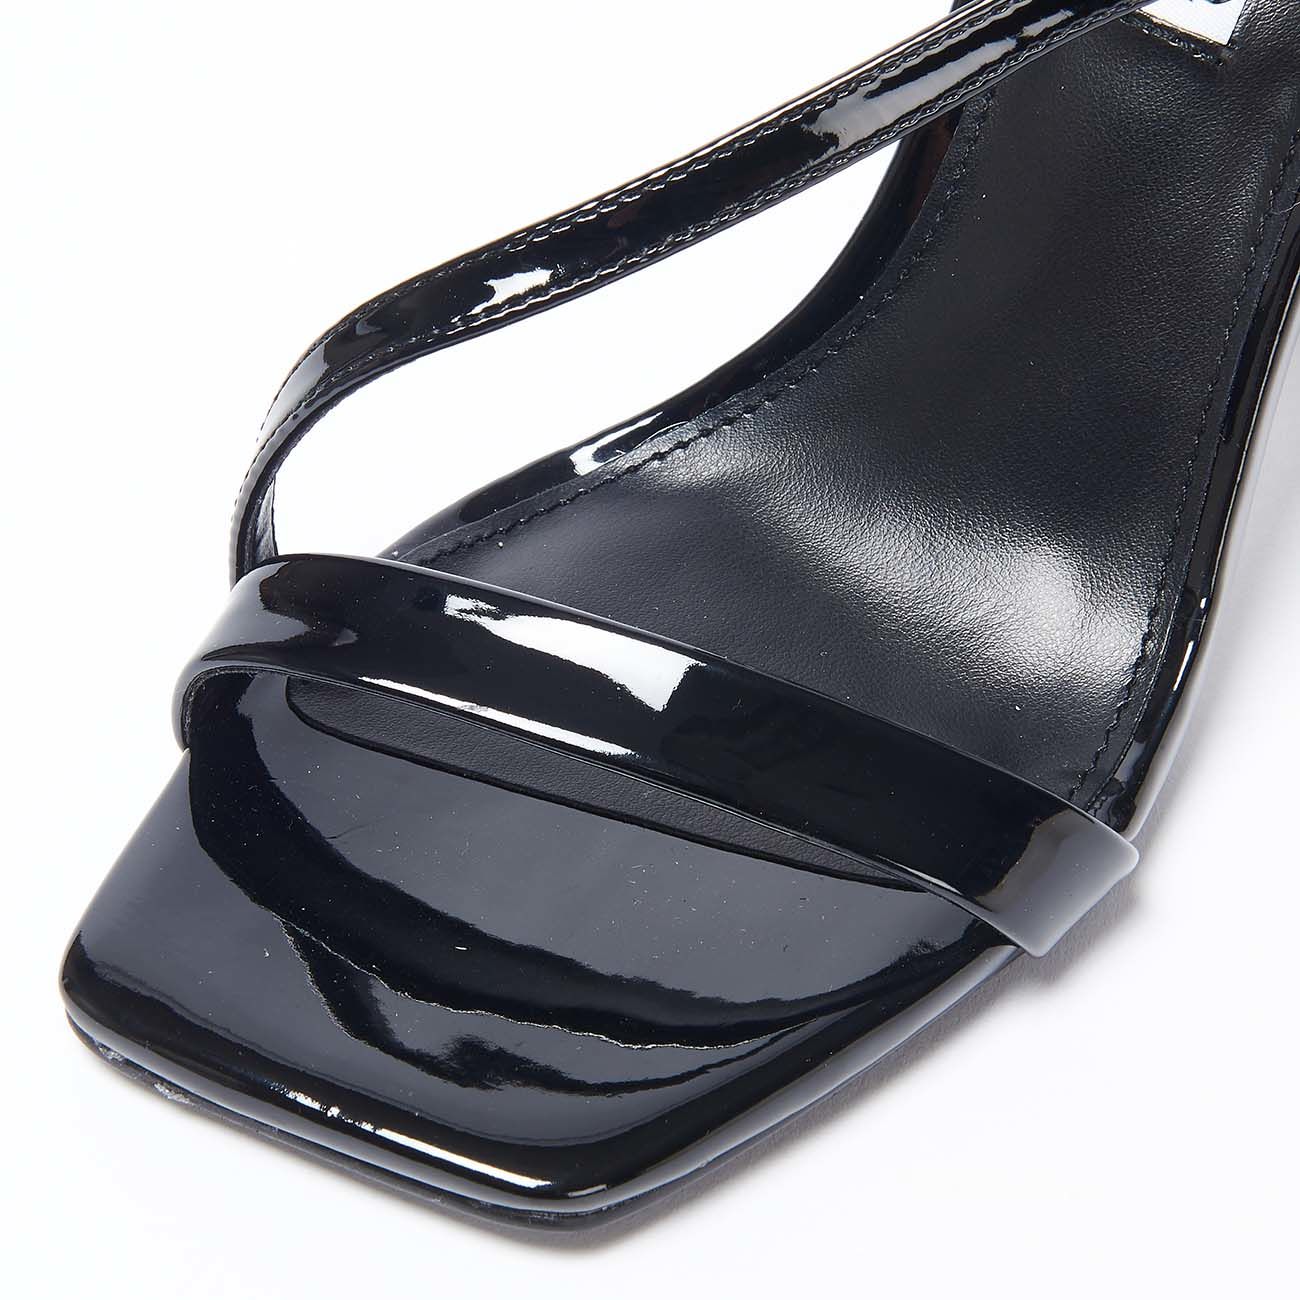 Patent leather sandals Chanel Black size 38 EU in Patent leather